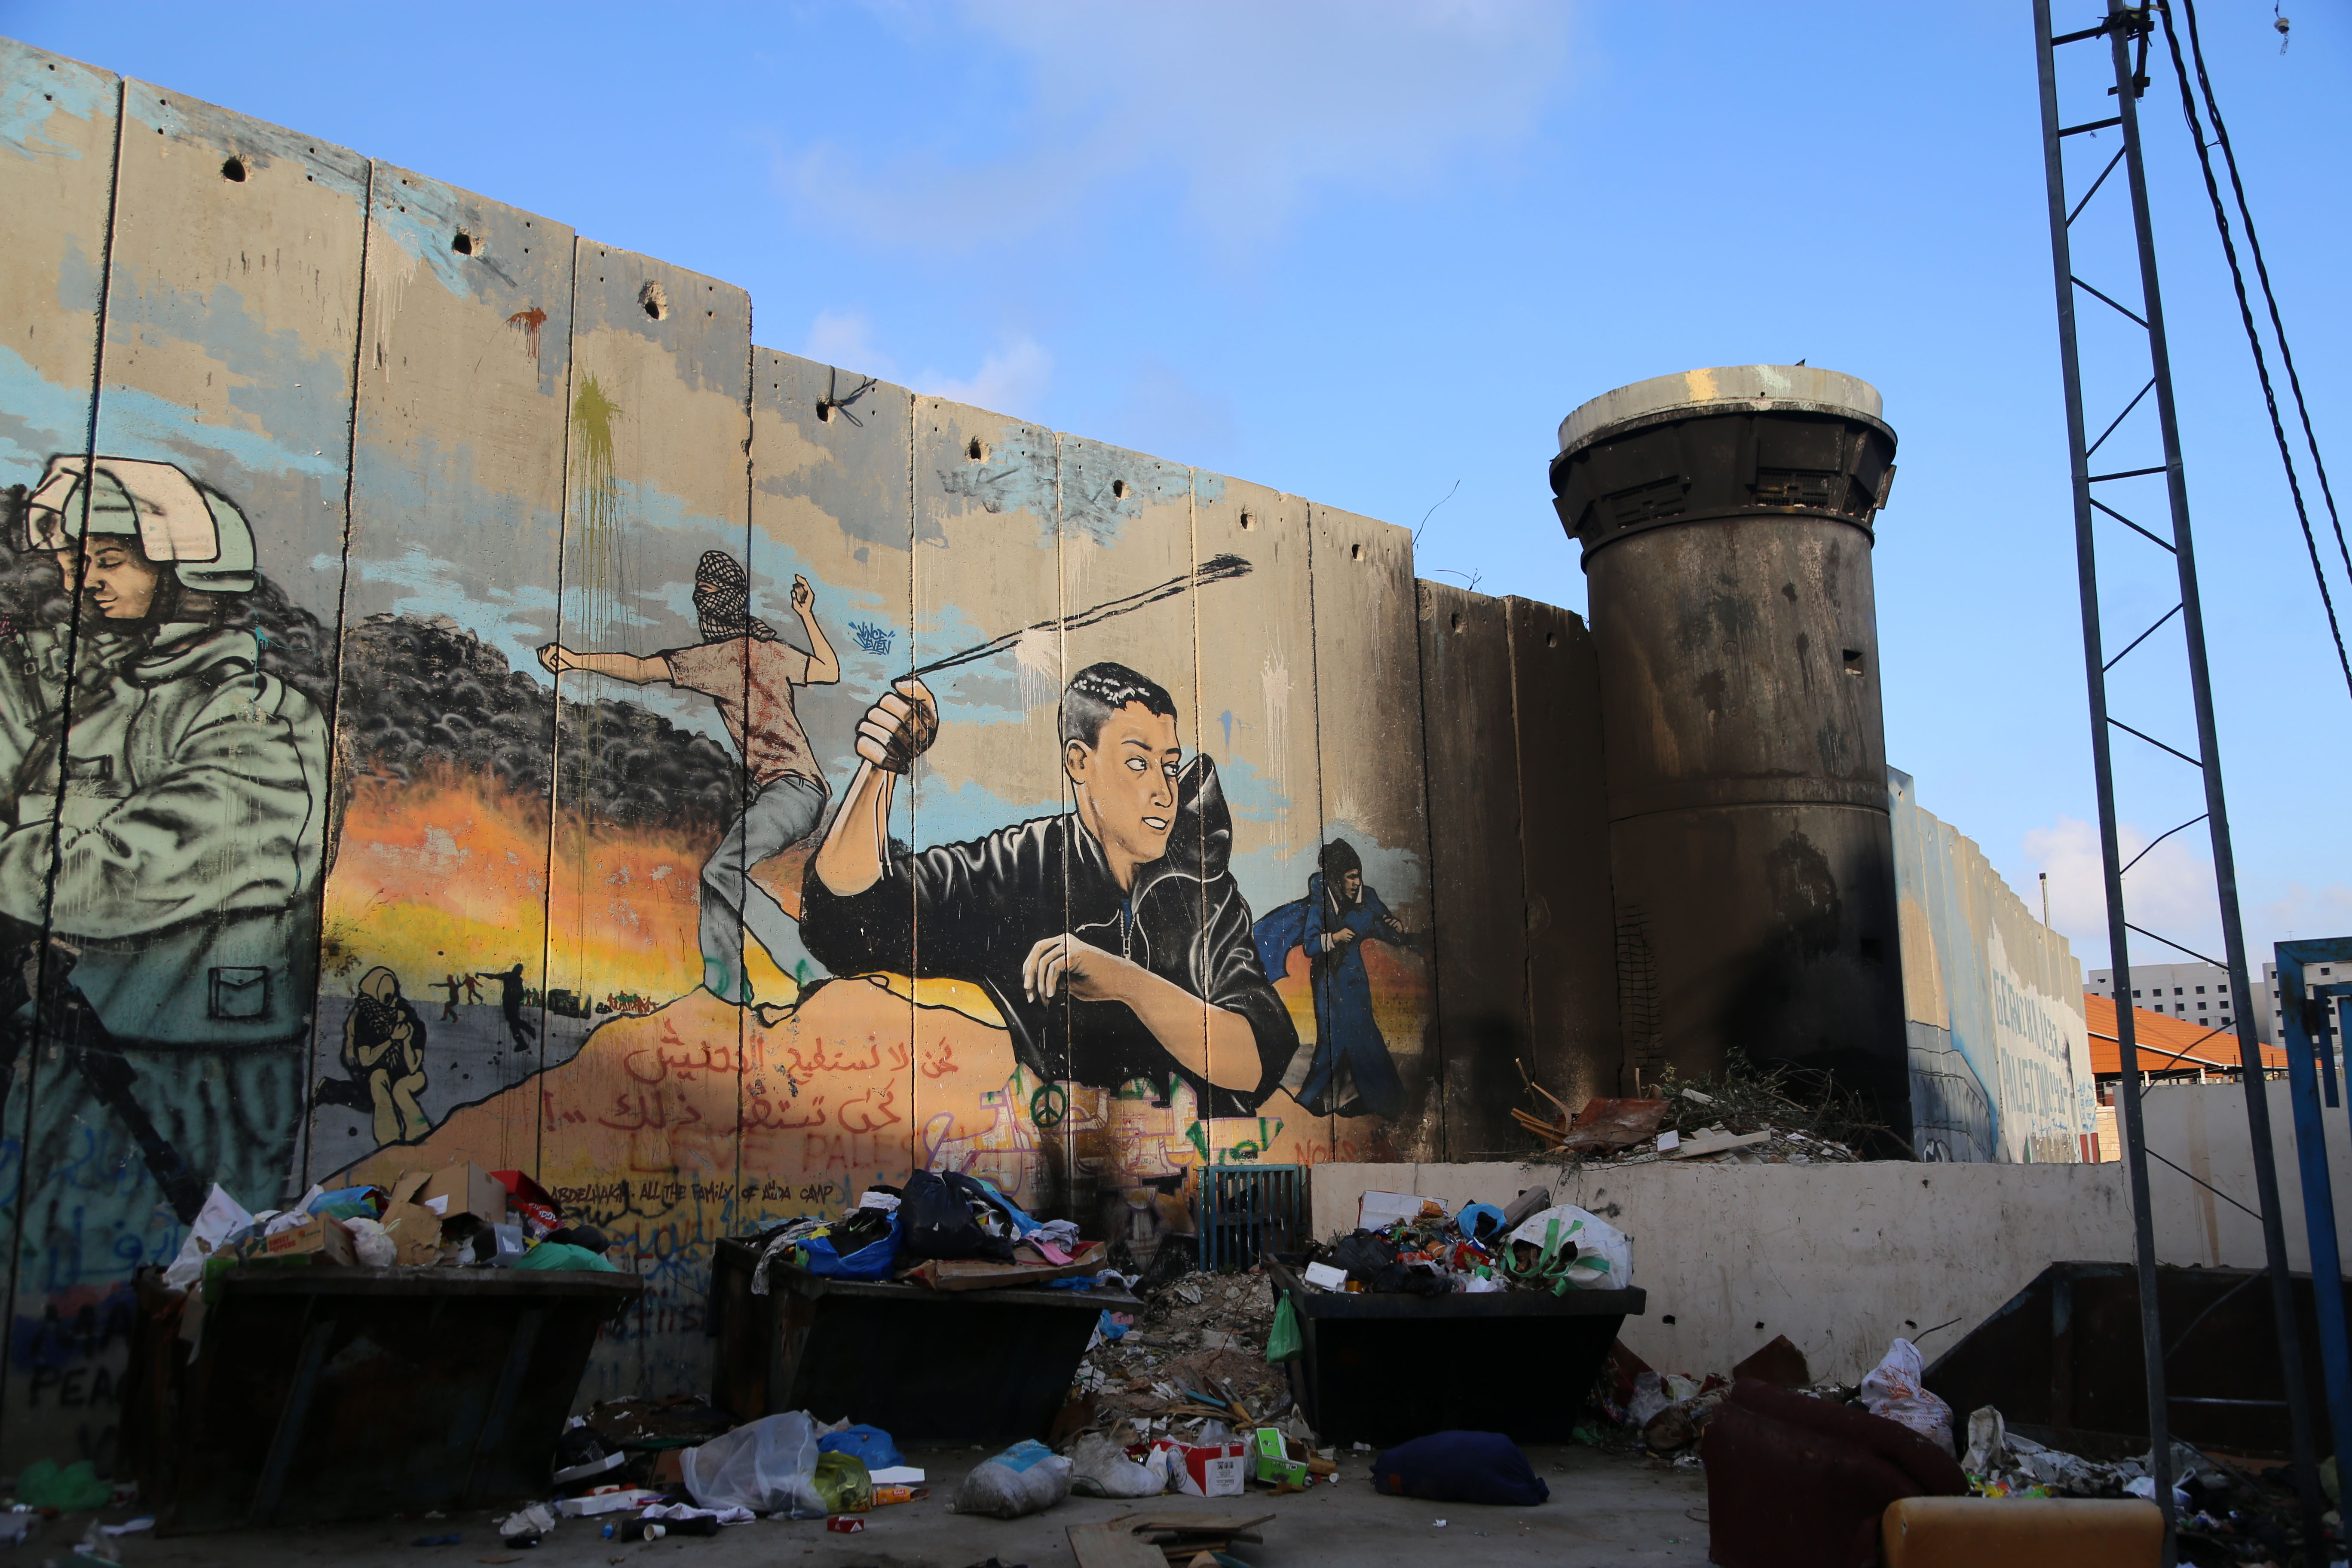 Murals line the wall just outside of Aida refugee camp. Youth from the area set the Israeli Defense Forces watchtower on fire in March 2014 after clashes between Palestinians and Israeli forces left more than a dozen Palestinians shot.